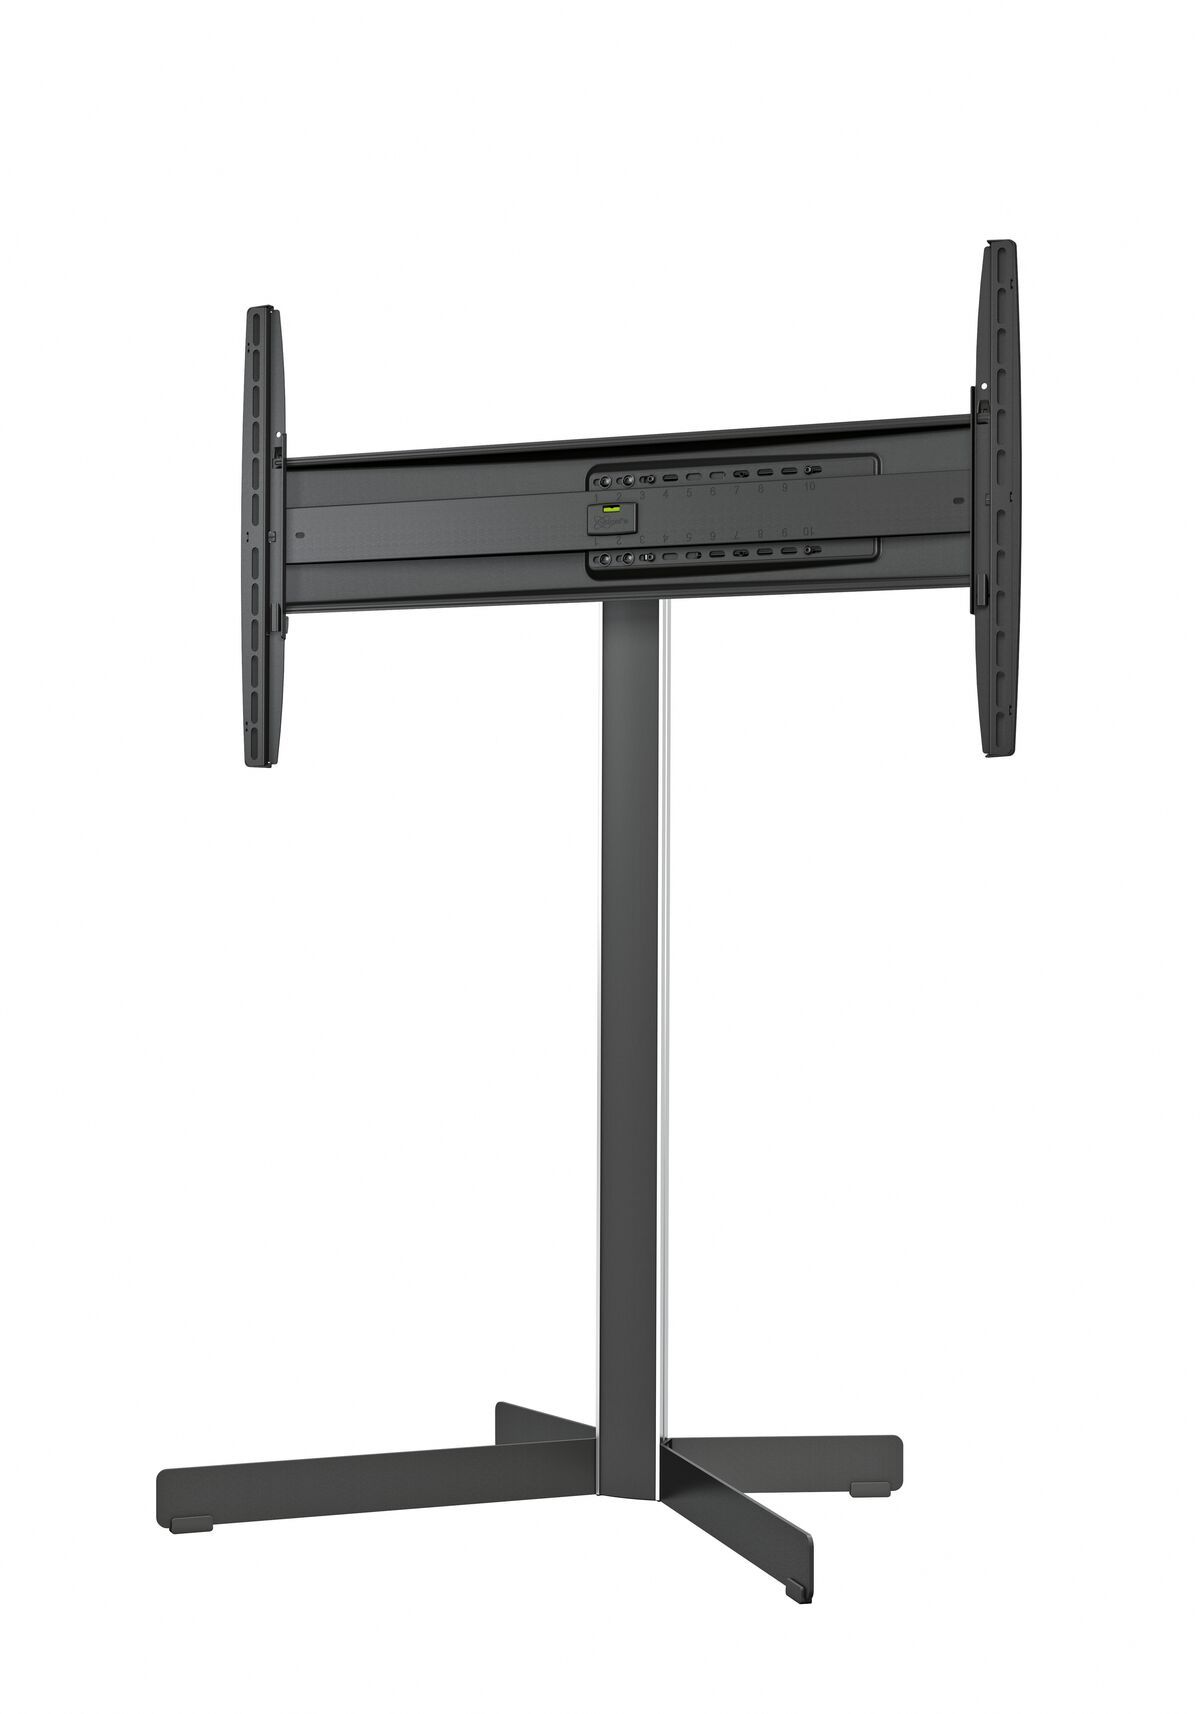 Vogel's EFF 8330 TV Floor Stand - Suitable for 40 up to 65 inch TVs up to Product